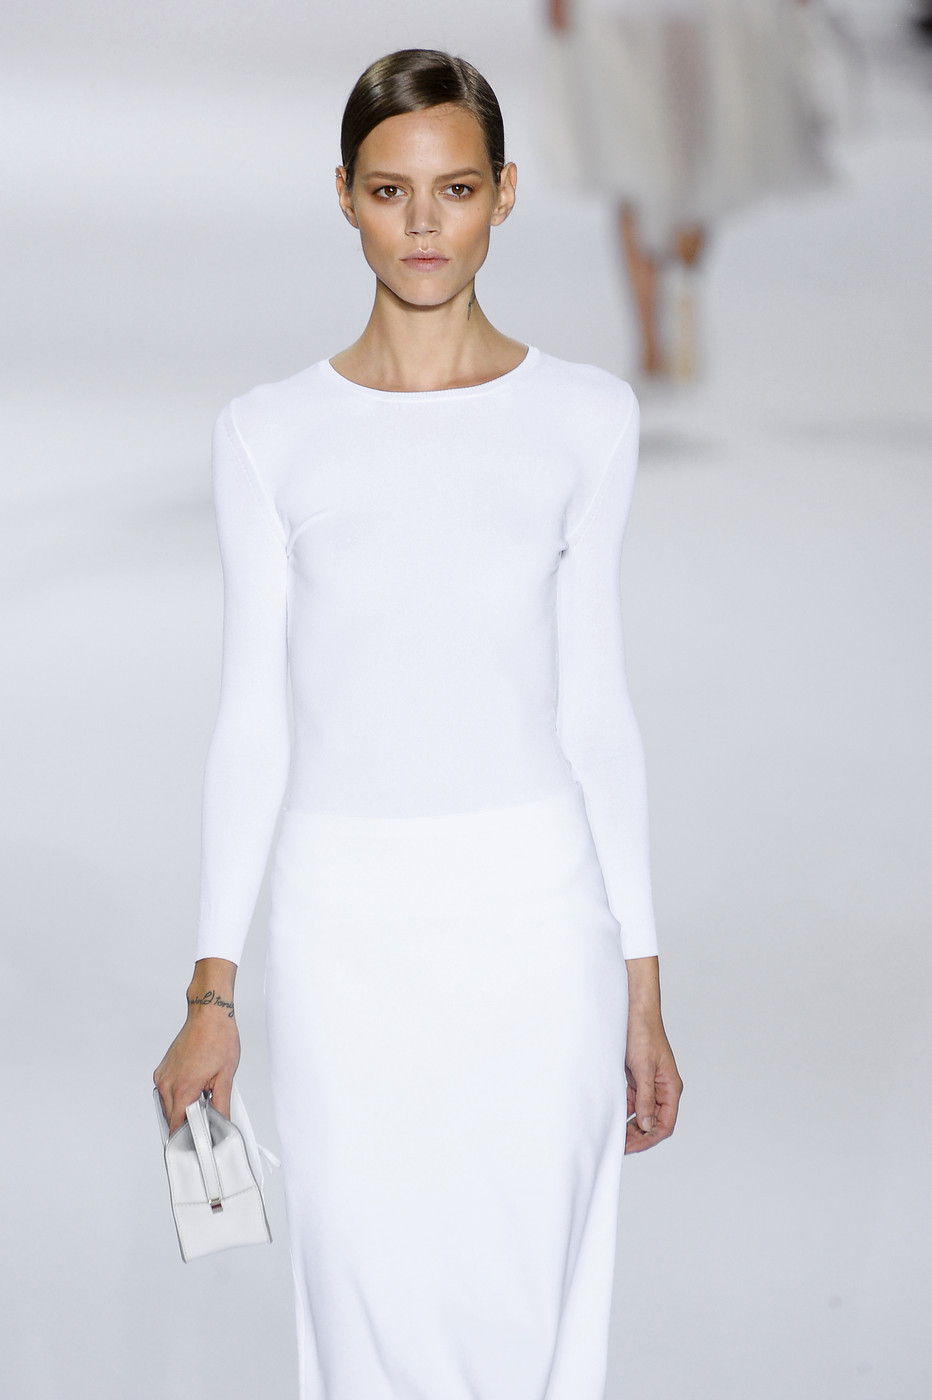 smoke-only-for-meisel: highqualityfashion: Chloe SS 11 how secretaries in heaven looks like 